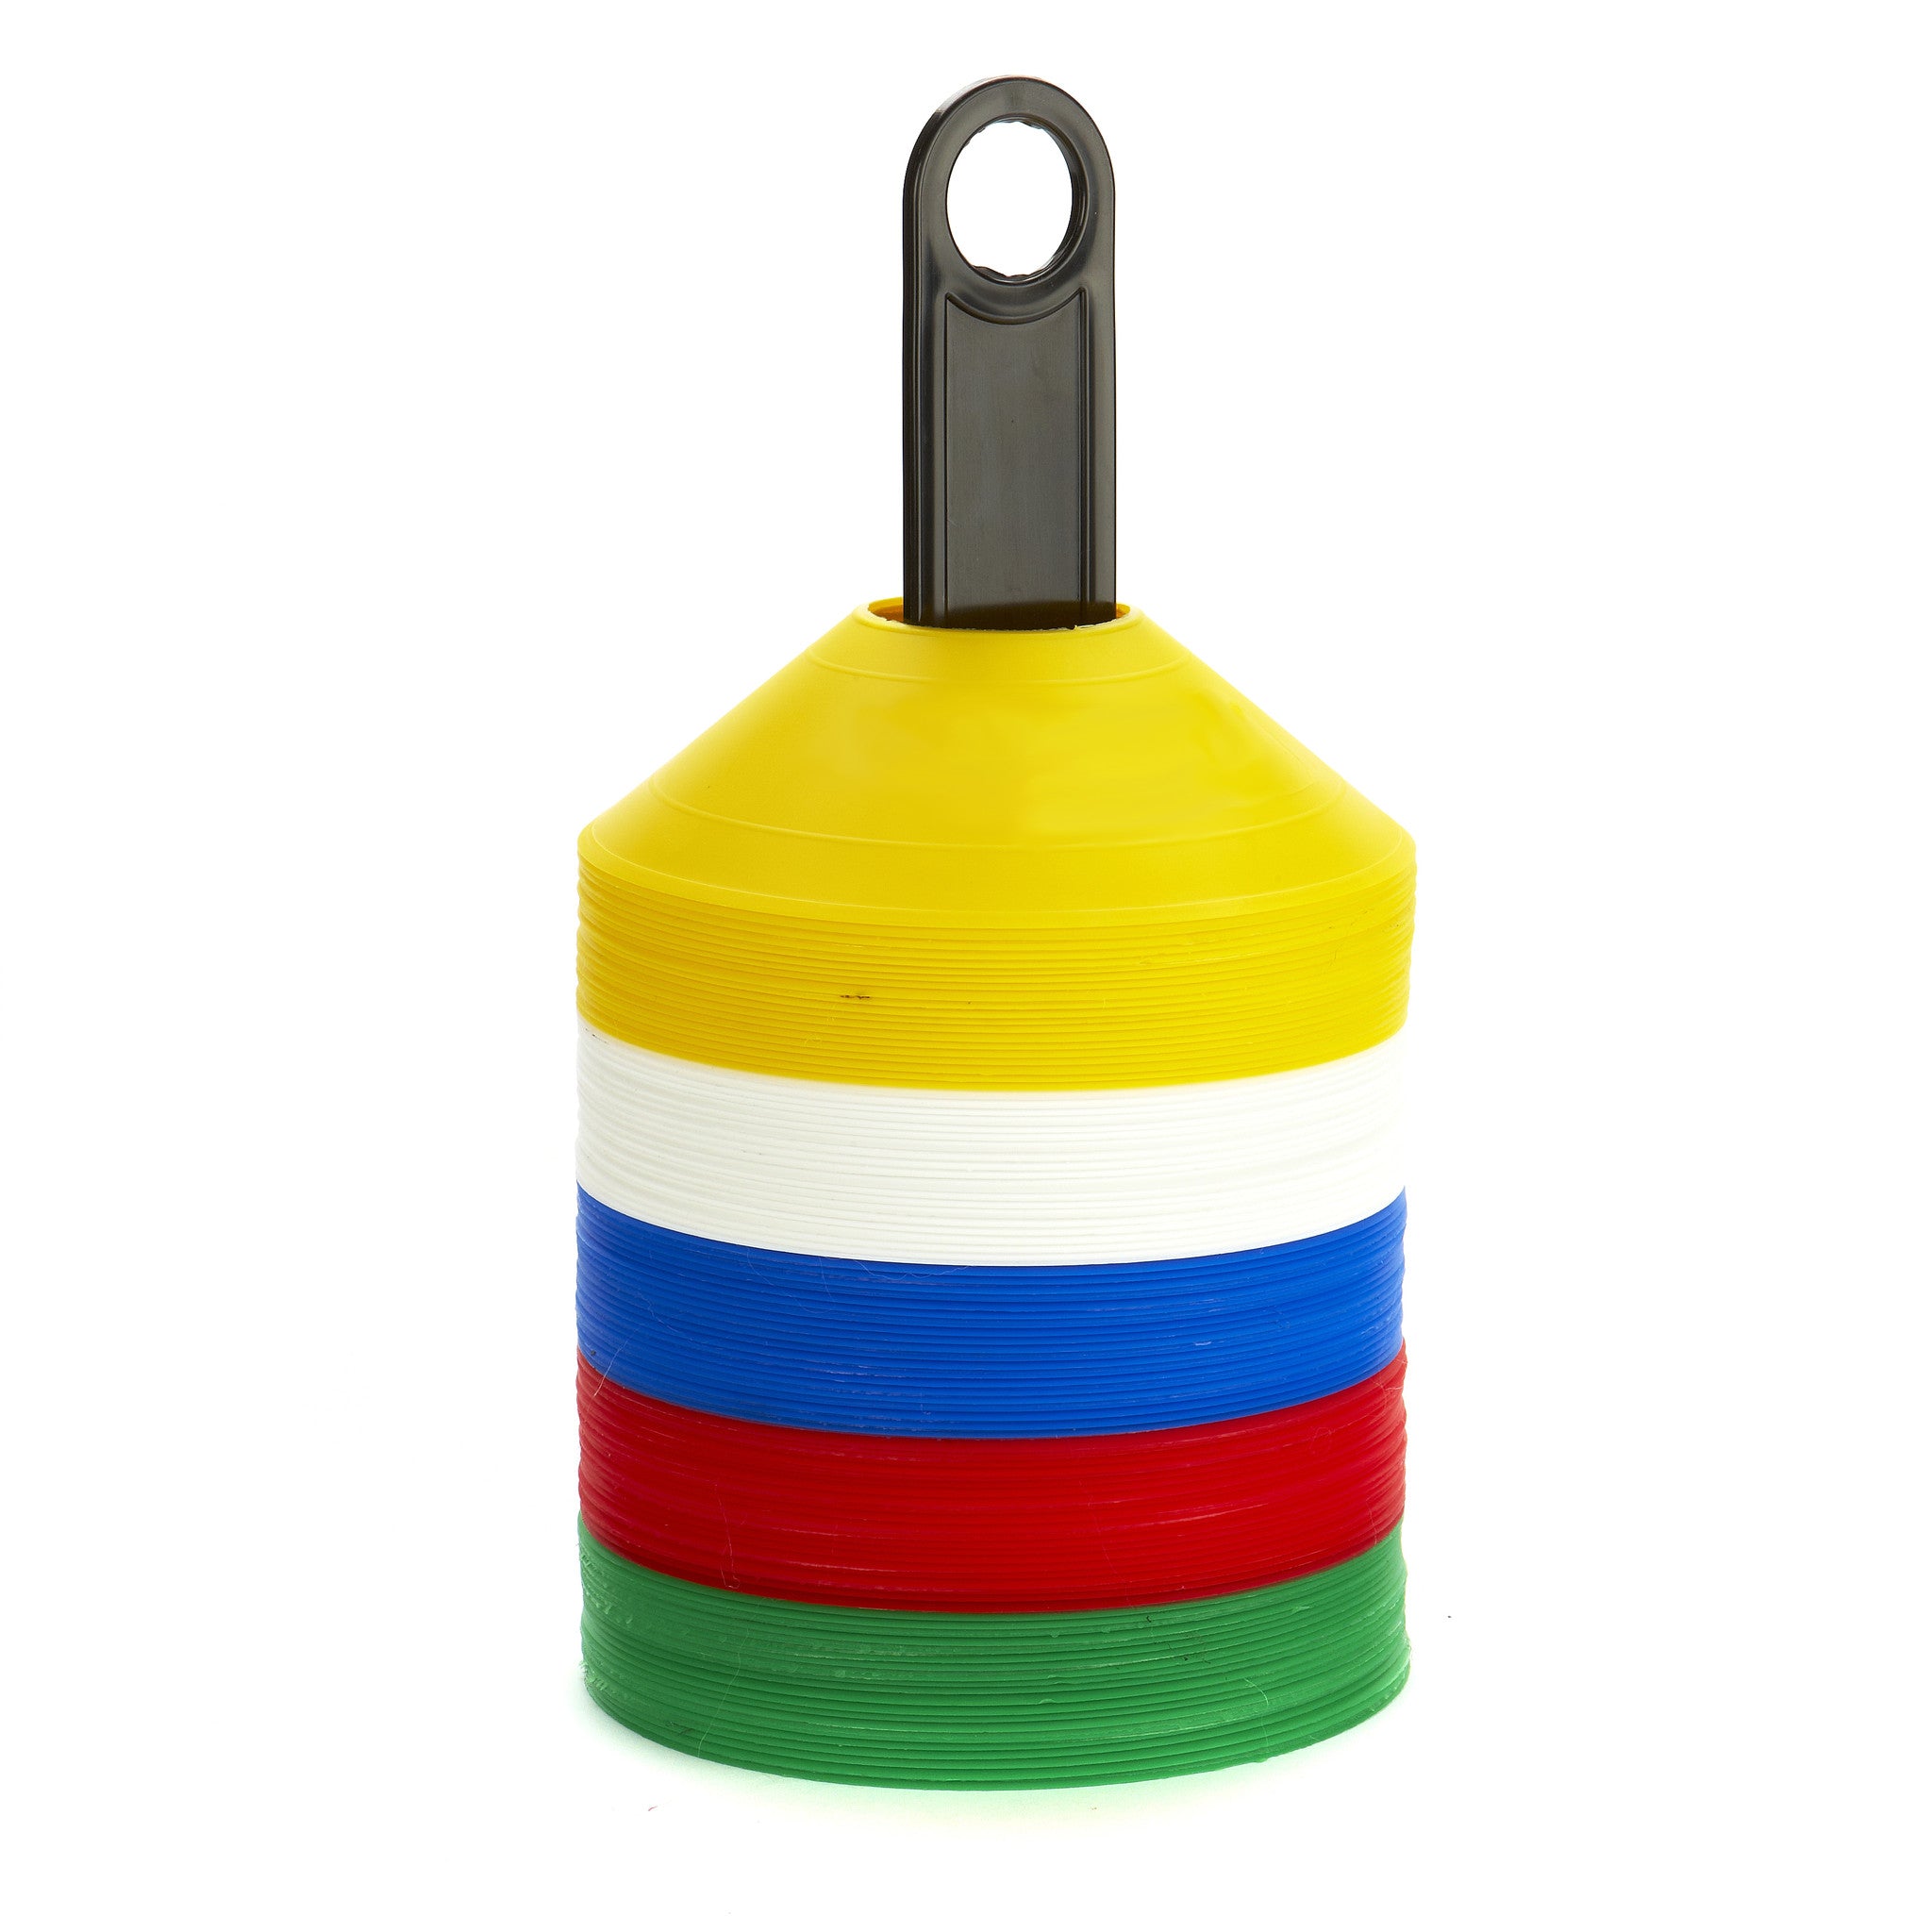 100 soft, safe, colourful Sports Markers on a handy carry pole. Bright yellow, white, blue, red & green markers.